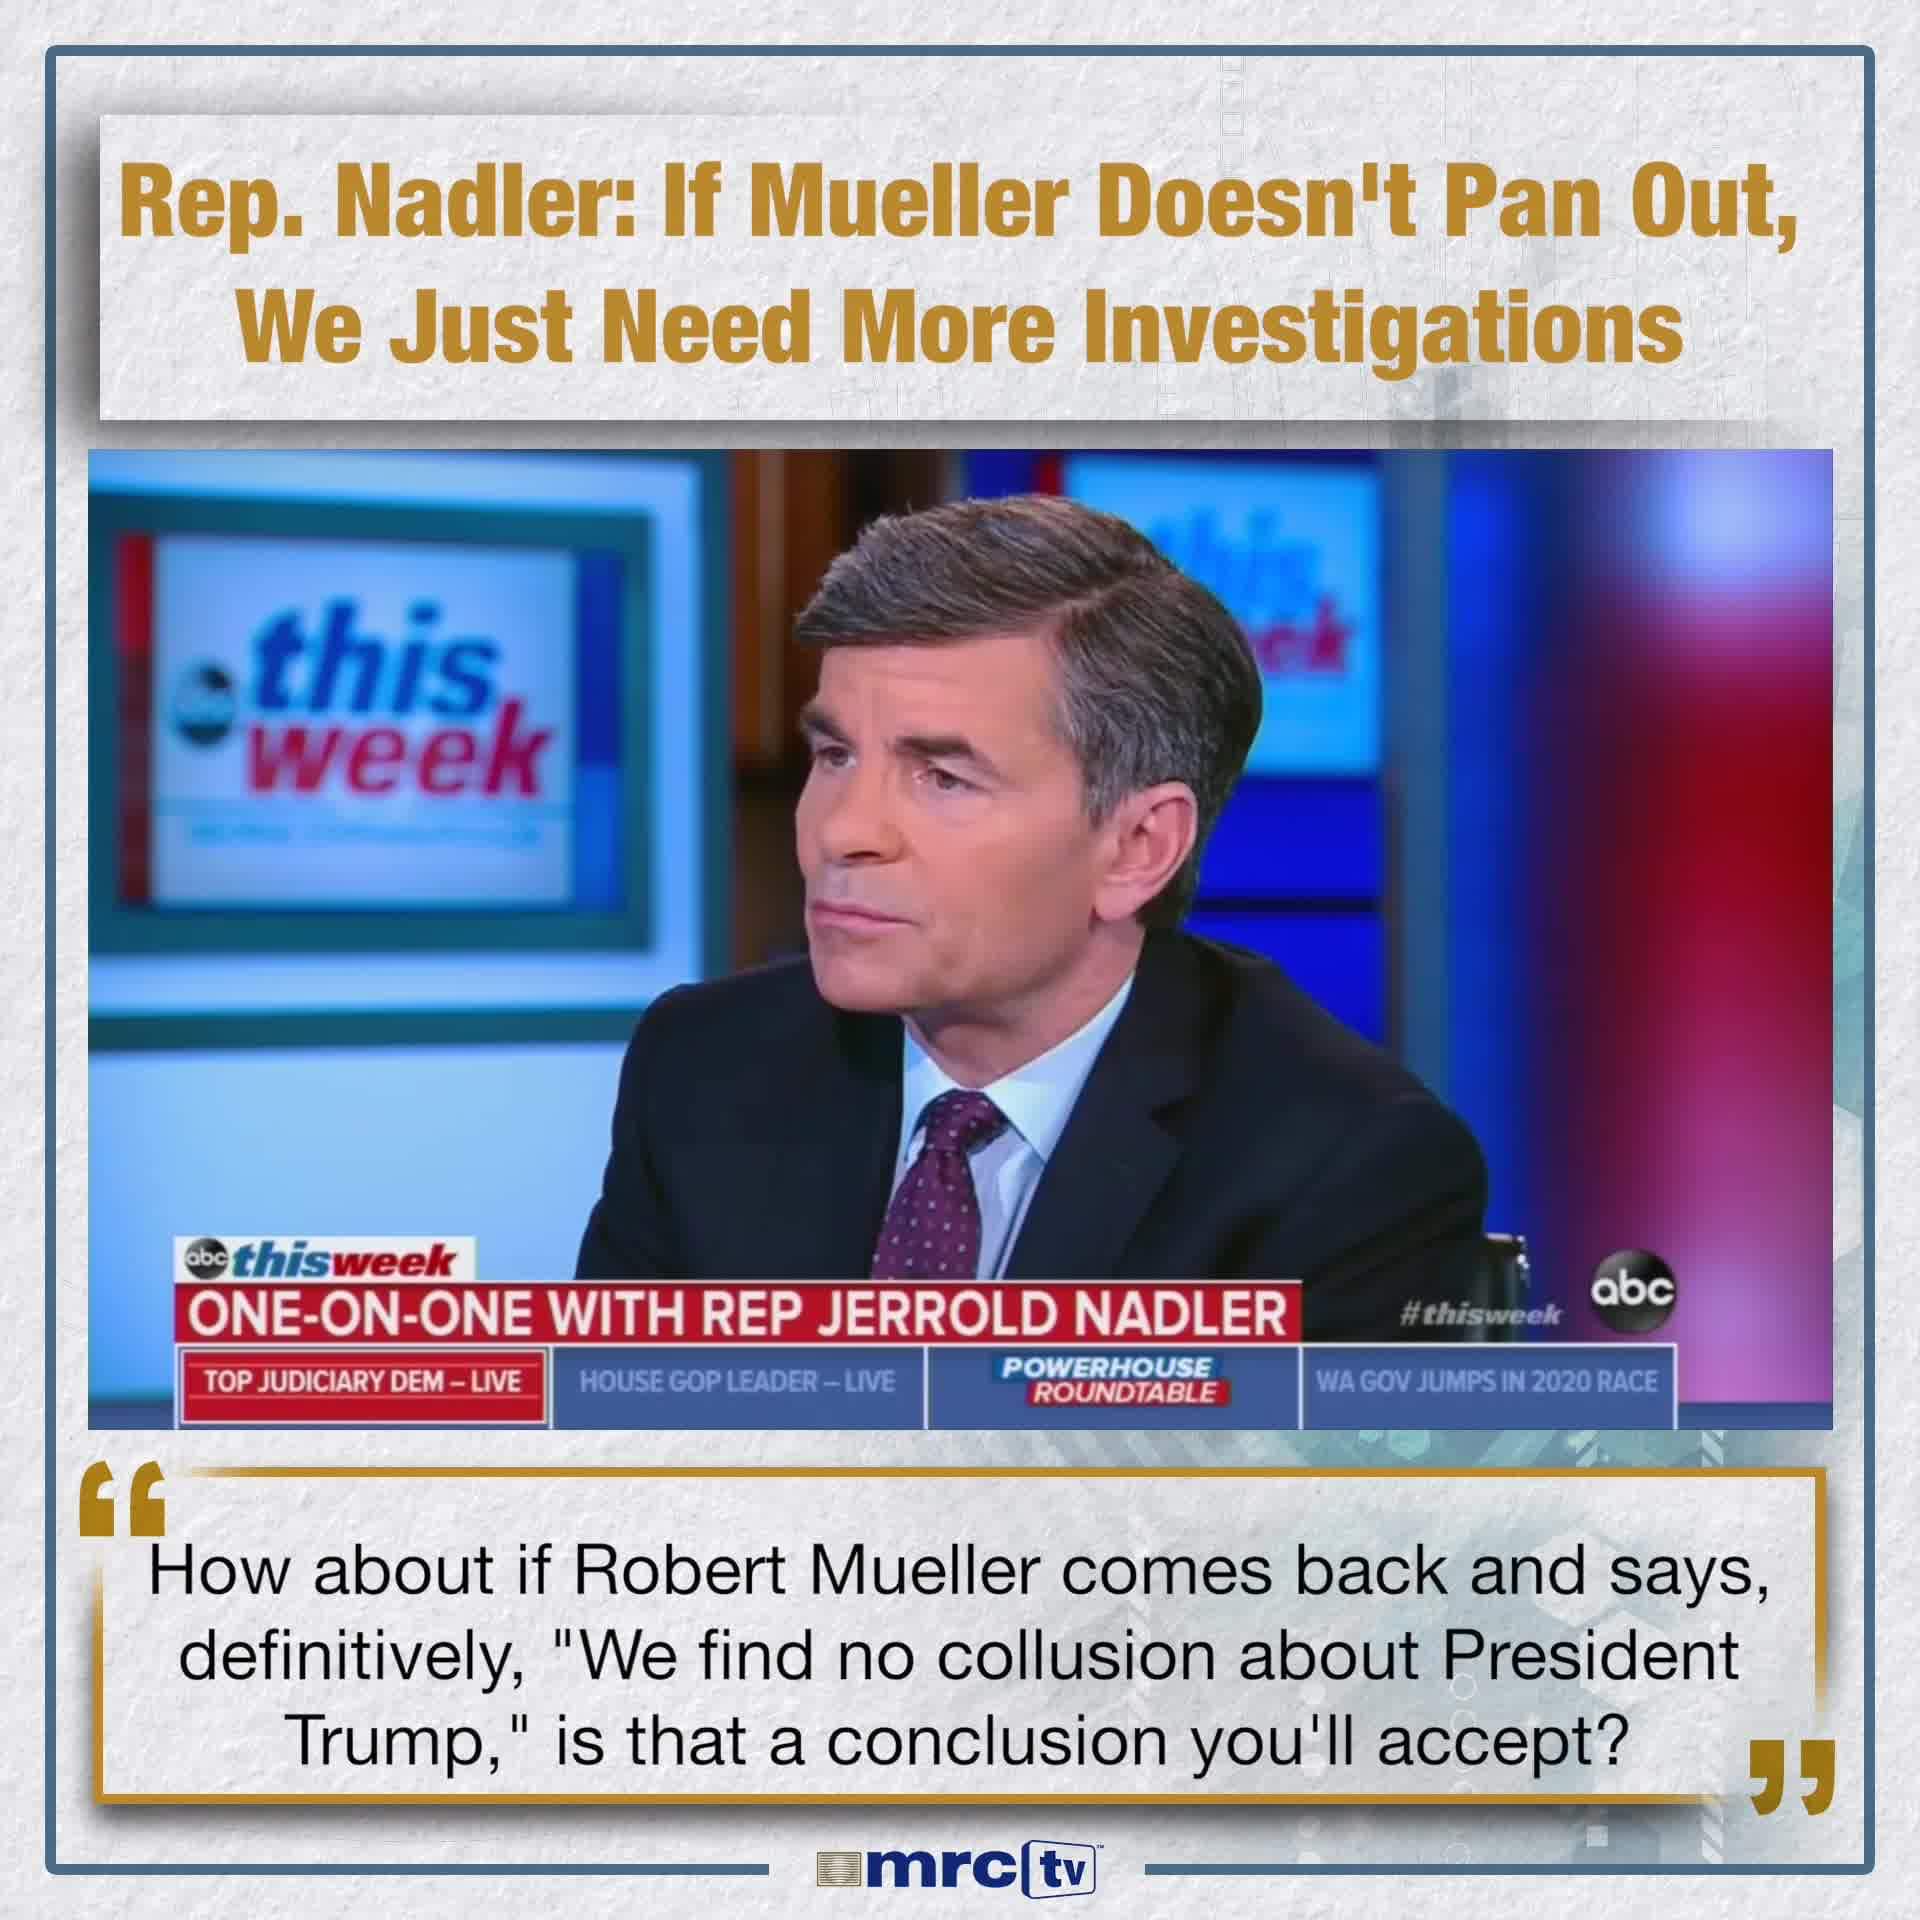 Rep. Nadler is setting the framework for MORE investigations as an insurance policy for when the 'Impeach Trump at all costs' liberals are likely dissapointed by the Mueller Report findings.